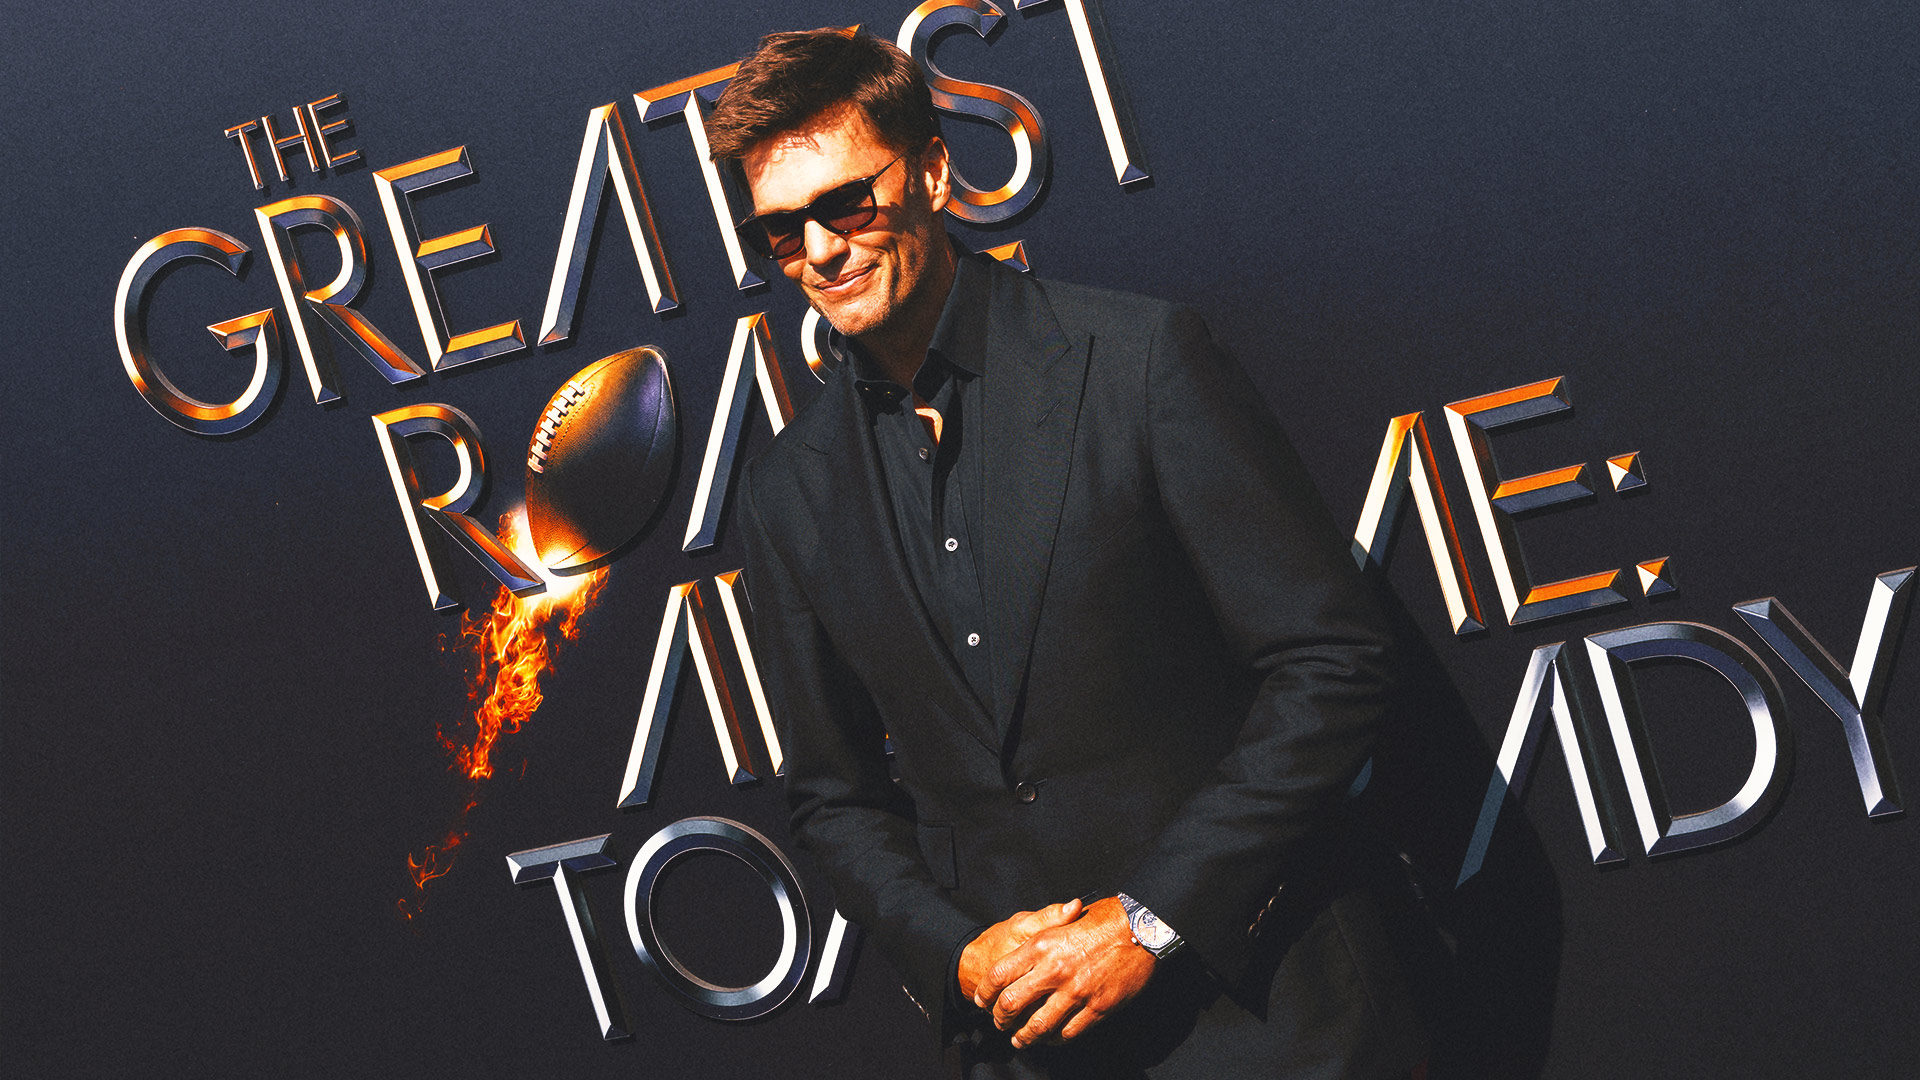 Bill Belichick, Peyton Manning and the best moments from Tom Brady's roast